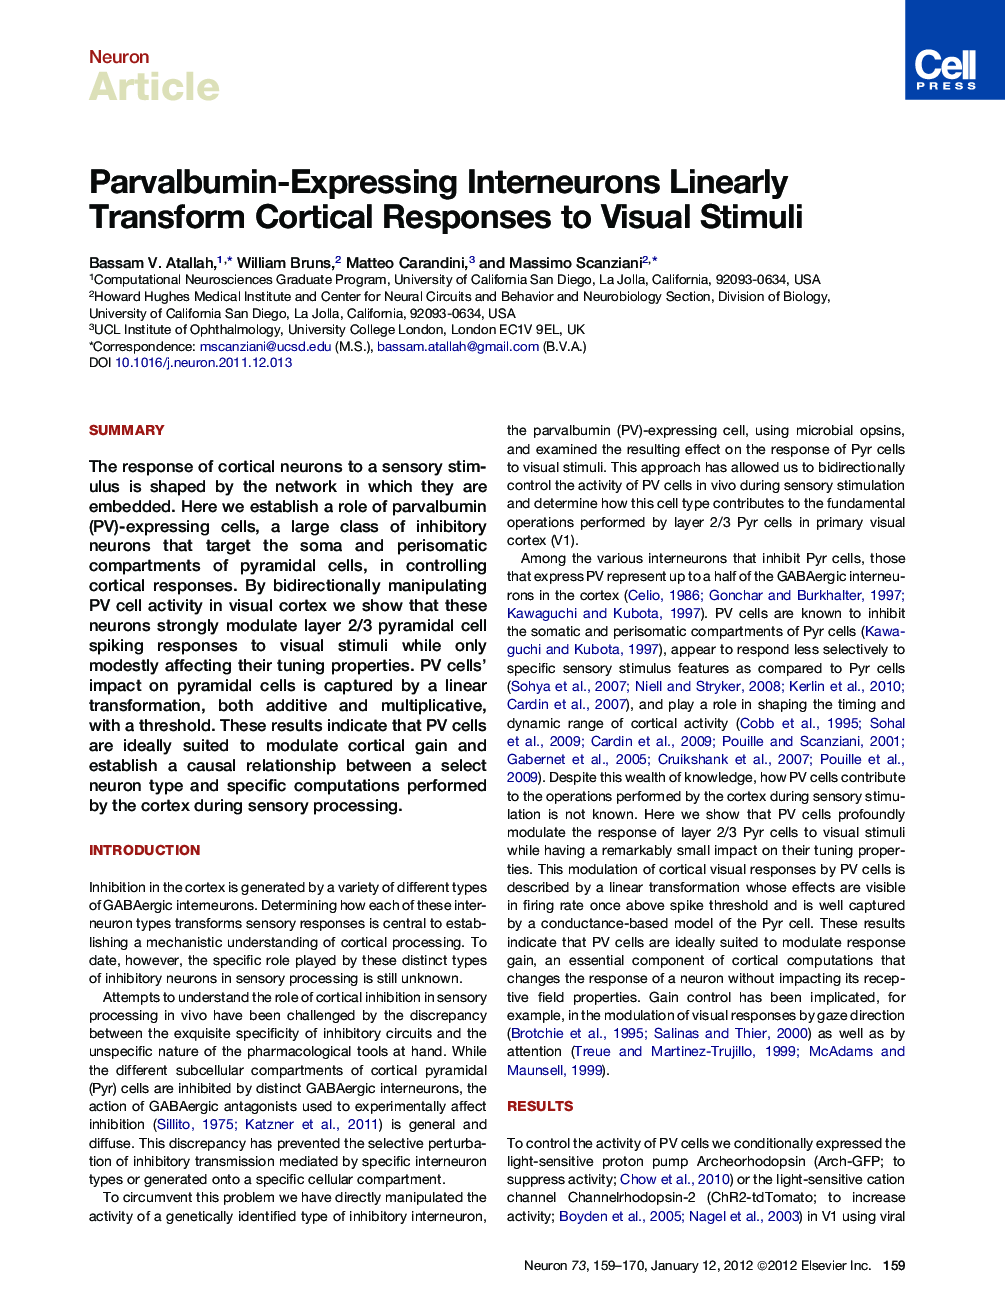 Parvalbumin-Expressing Interneurons Linearly Transform Cortical Responses to Visual Stimuli